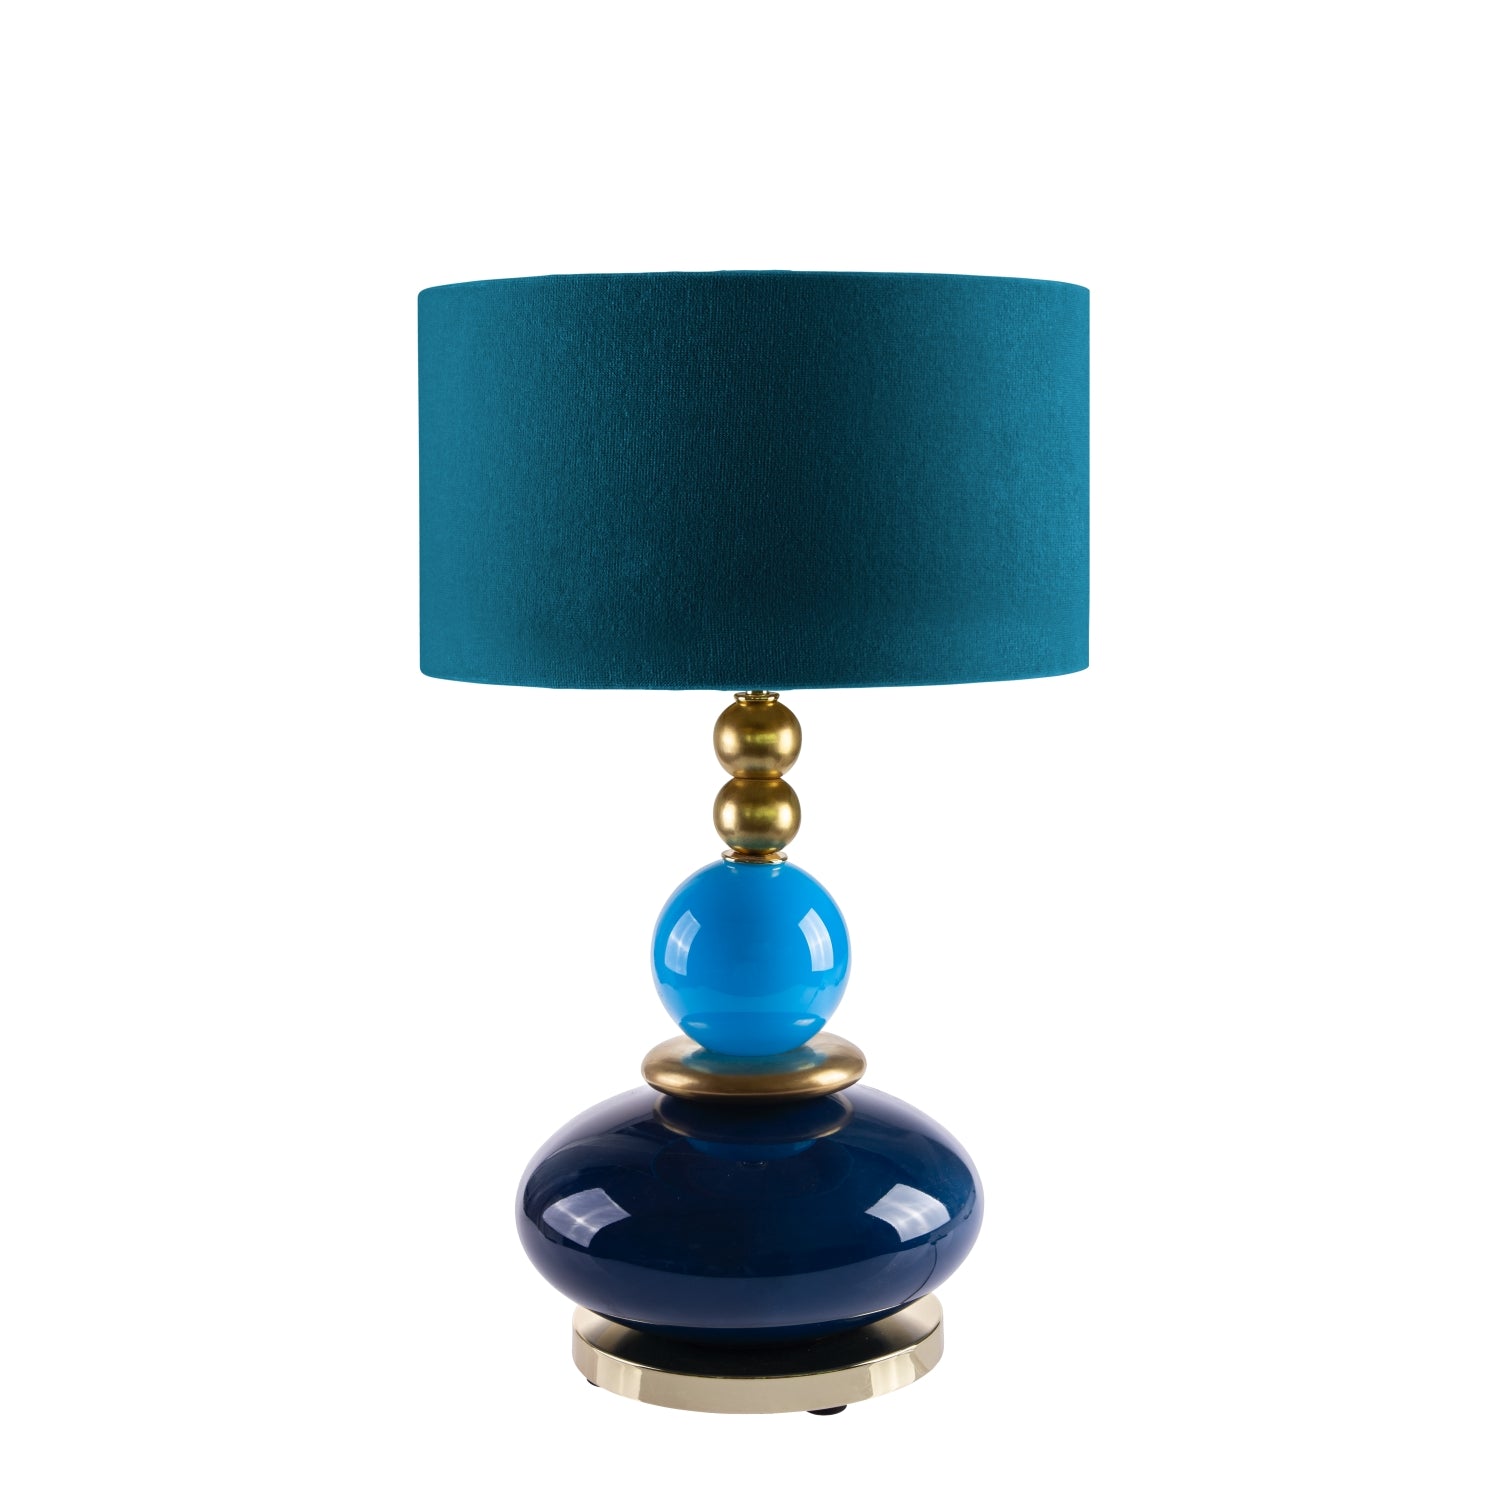 Violette Small Table Lamp - Blue & Gold